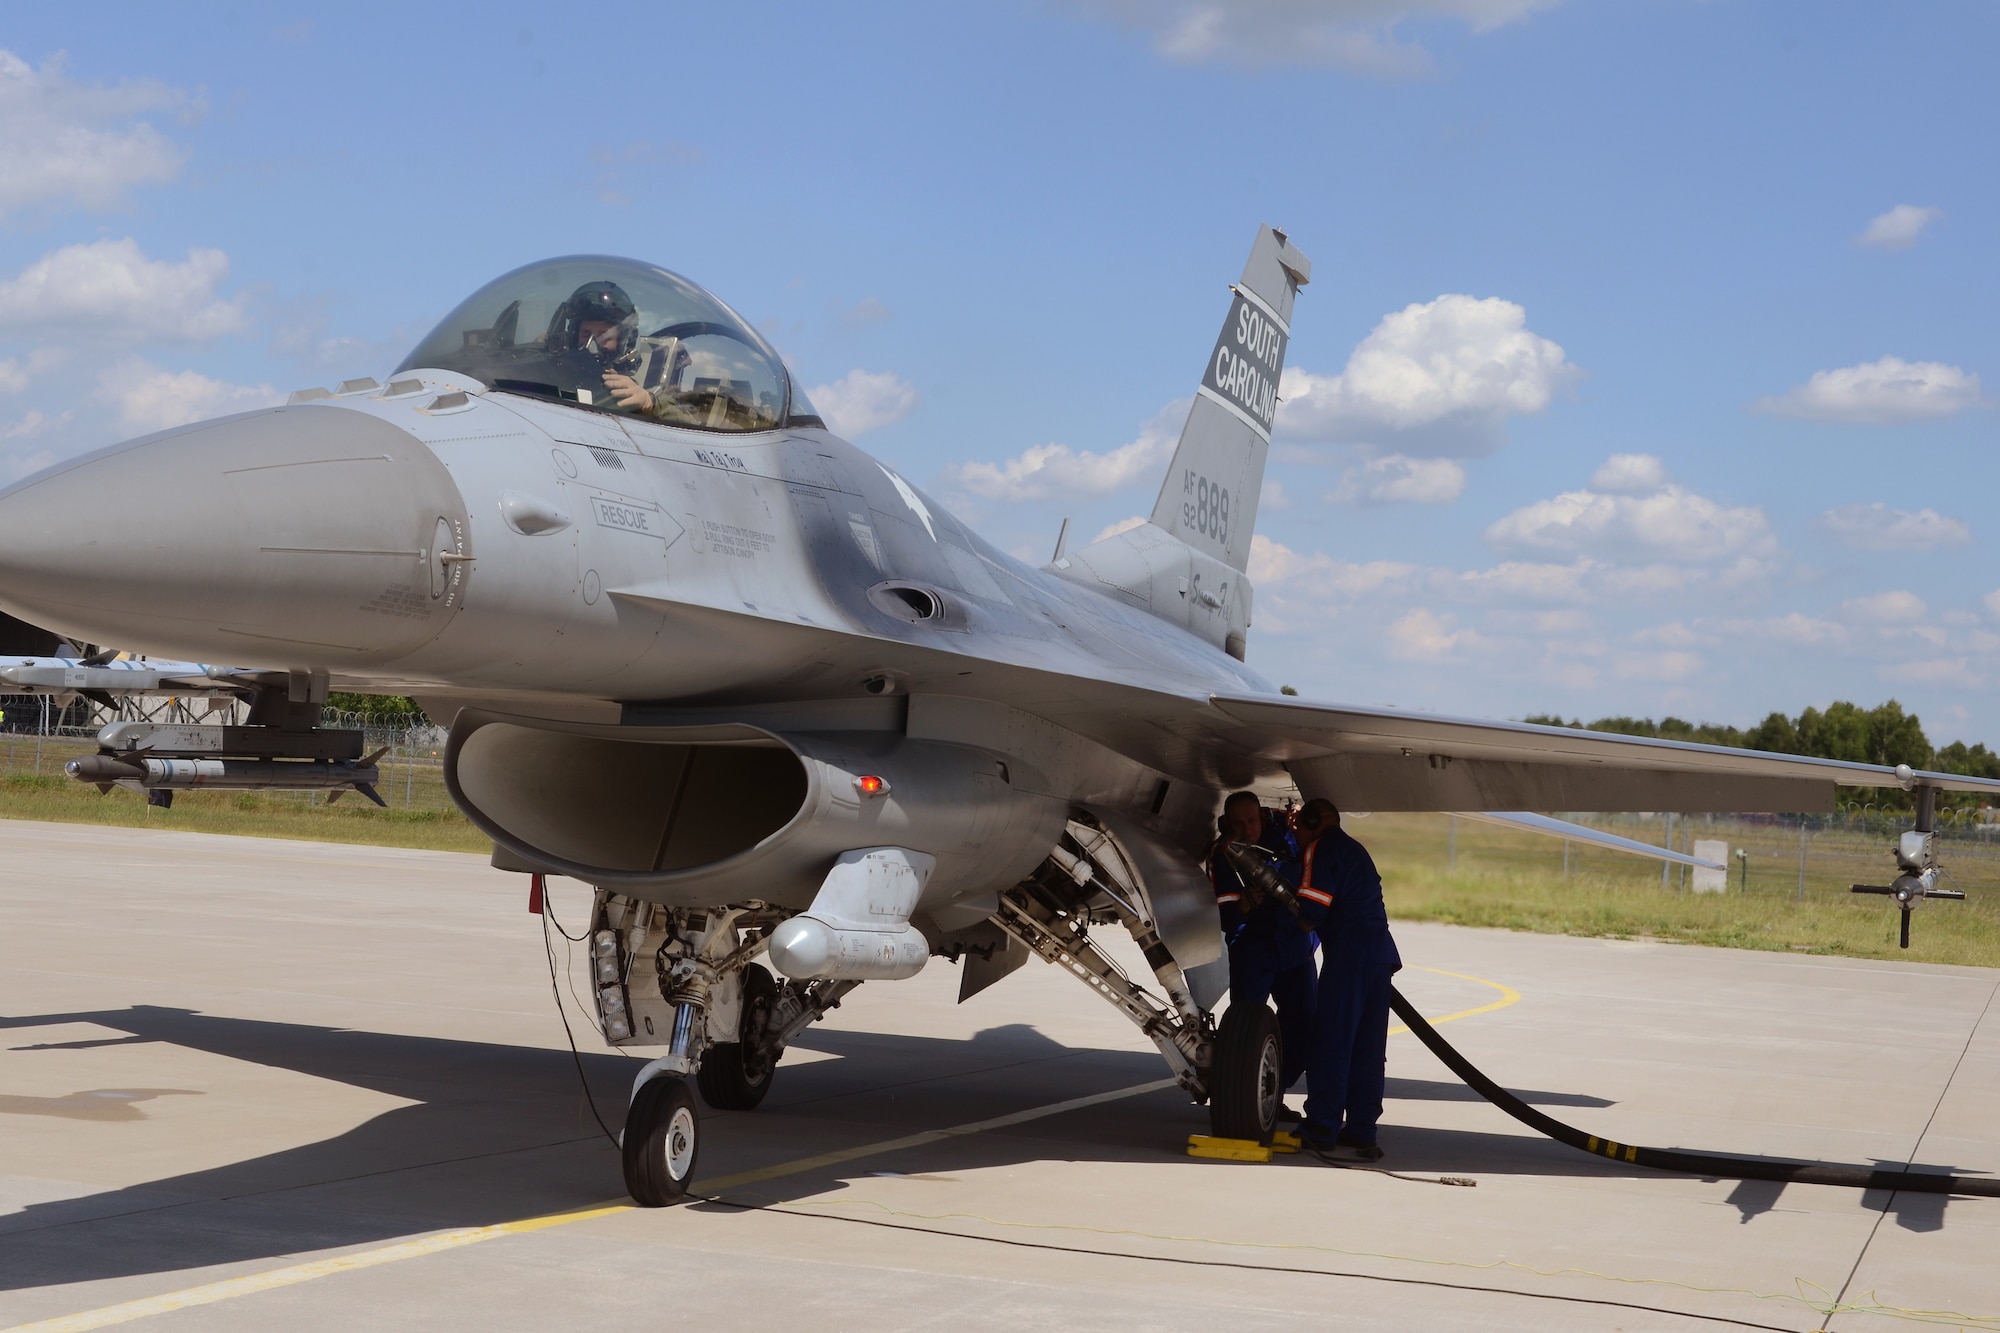 Polish air force Young Warrant Officer Adam Maksymowicz and Senior Sgt. Pawel Czapski, both from the 32nd Tactical Air Base at Łask Air Base, Poland, "hot-pit" refuel a South Carolina Air National Guard F-16 fighter jet, piloted by Capt. Mark "Dirty" Fattman, June 1, 2015. F-16 aircraft maintenance crews from the Polish 32nd Tactical Air Base and the South Carolina Air National Guard's 169th Fighter Wing teamed-up to conduct "hot-pit" refueling at Łask Air Base, Poland, June 1, 2015. The 32nd Tactical Air Base was recently certified to perform "hot-pit" refueling, which involves refueling a recently landed F-16 so that it can take off for another mission without stopping its engine. Three units worked together to learn "hot-pitting" techniques from each other as well as offering opportunities for Polish Airmen to learn from the more seasoned 169th Fighter Wing and 52d Fighter Wing maintainers. U.S. Air Force Airmen from Spangdahlem Air Base, Germany and the South Carolina Air National Guard’s 169th Fighter Wing from McEntire Joint National Guard Base, are deployed to Łask Air Base in support of Operation Atlantic Resolve, during the month of June. These training missions, called Aviation Detachment Rotations, pair U.S. fighter pilots and maintenance crews with their Polish Air Force counterparts at Łask Air Base, during Operation Atlantic Resolve. This bilateral training, hosted by permanently assigned USAF service members assigned to Poland, has taken place since 2012. Through strengthened relationships and engagements with our allies, the U.S. and NATO demonstrate their shared commitment to a peaceful, stable and secure Europe. (South Carolina Air National Guard photo by Senior Master Sgt. Edward Snyder / RELEASED)